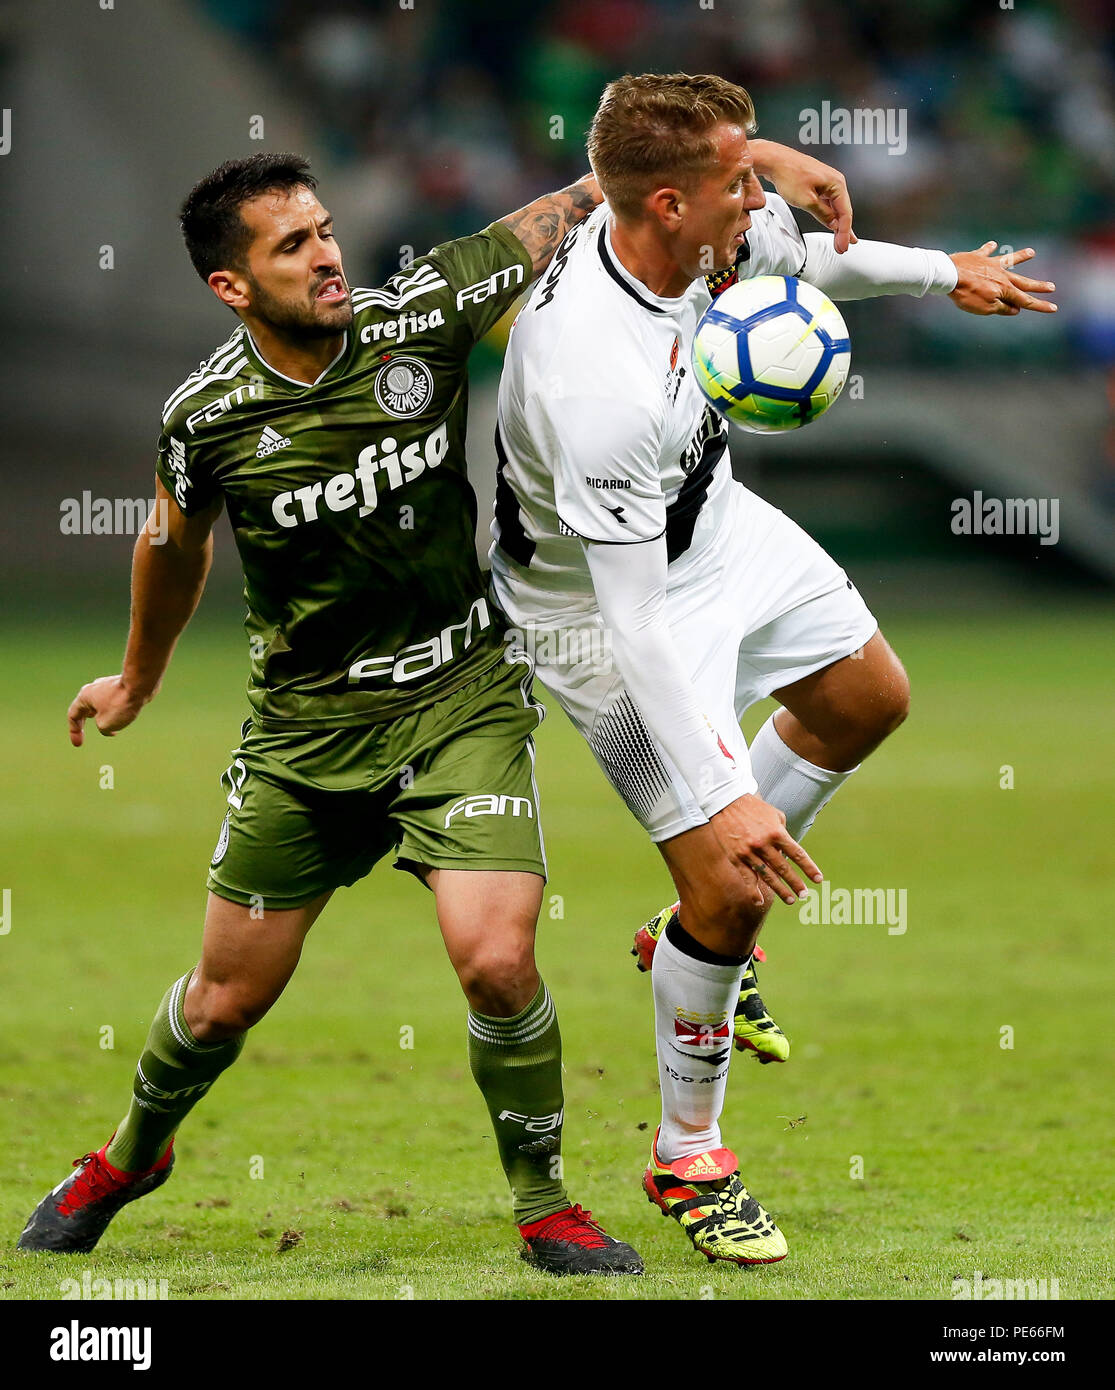 SÃO PAULO, SP - 12.08.2018: PALMEIRAS X VASCO - Maxi Lopez and Luan during the match between Palmeiras and Vasco da Gama held at Allianz Parque, West Zone of São Paulo. The match is valid for the 18th round of the 2018 Brazilian Championship. (Photo: Marco Galvão/Fotoarena) Stock Photo